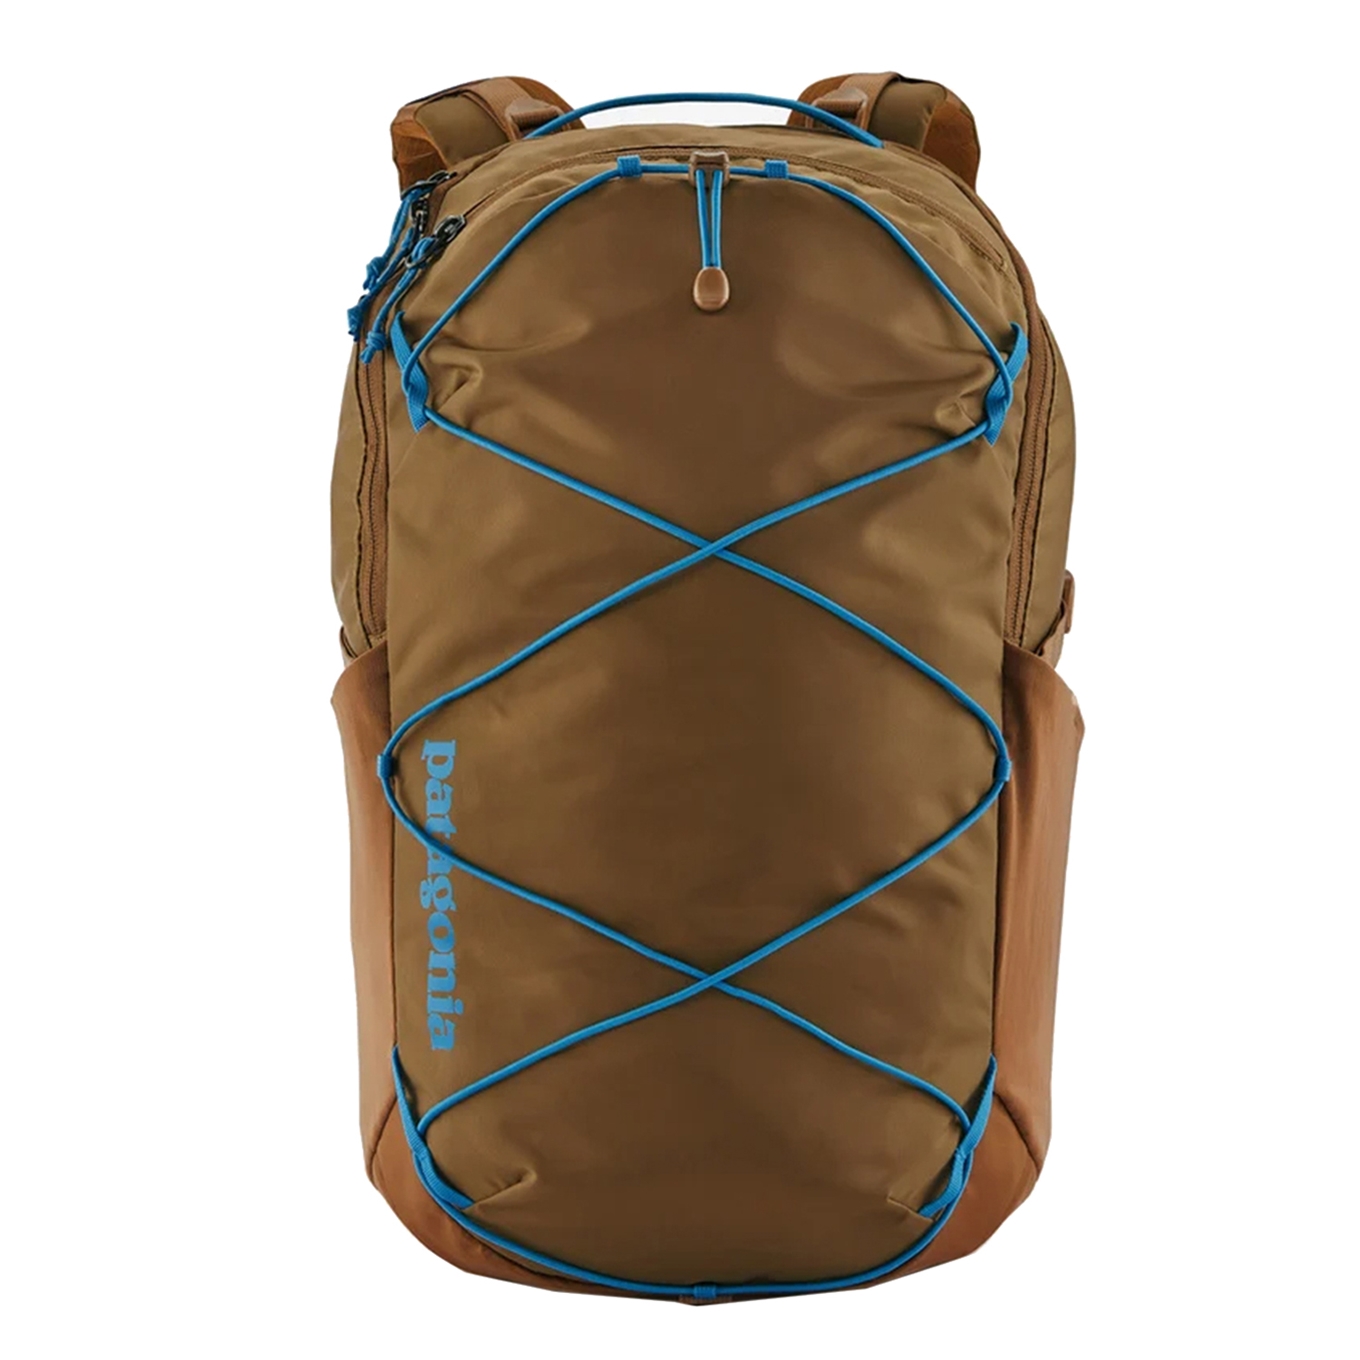 Patagonia Refugio Day Pack 30L coriander brown backpack